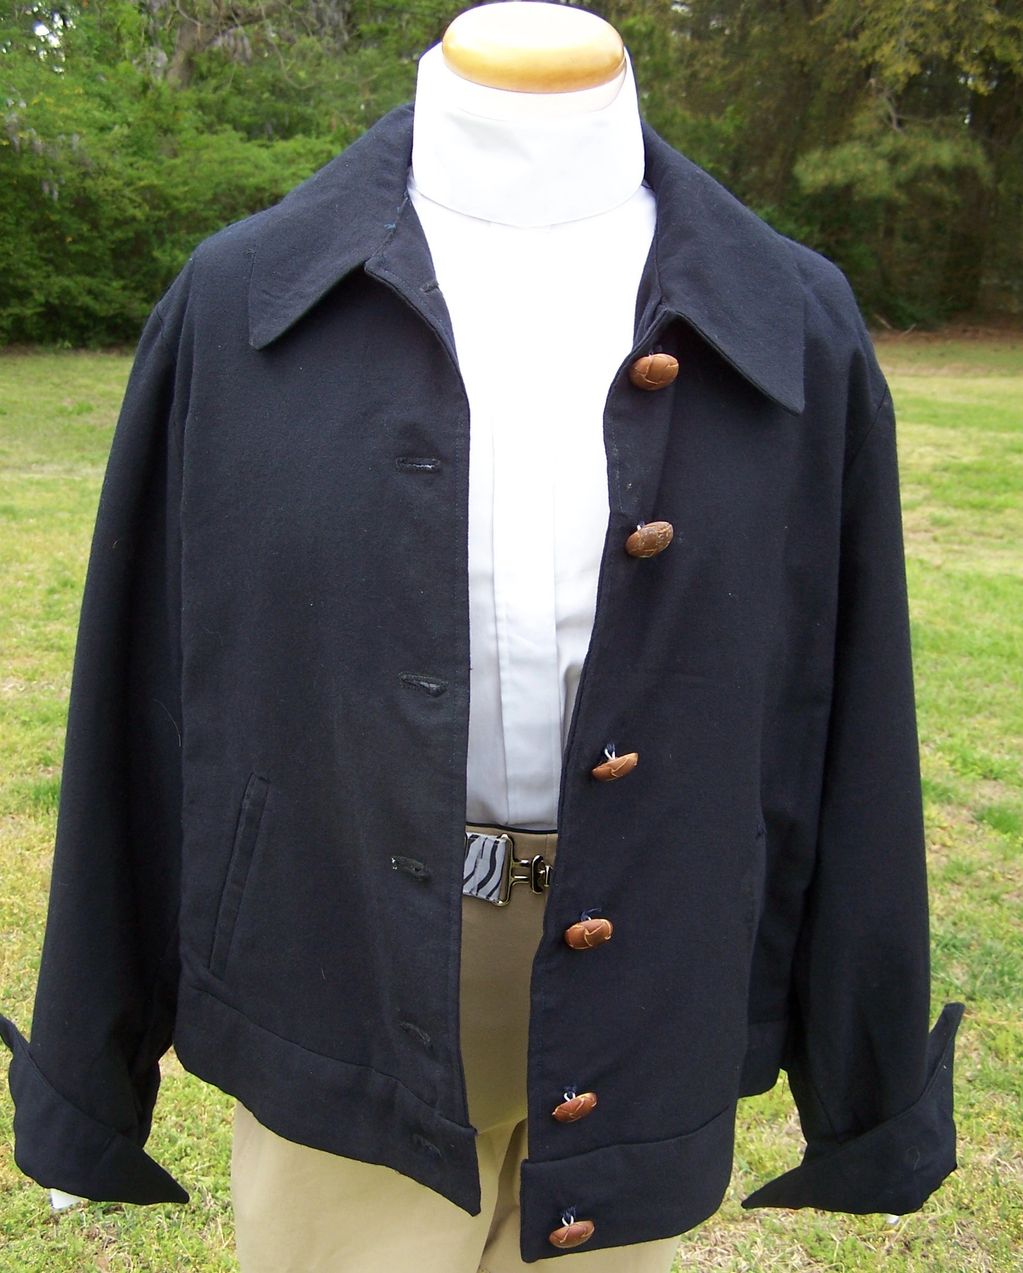 Our Custom Casual Equestrian Jacket. Made with quality fabrics including wool, lightweight blends an